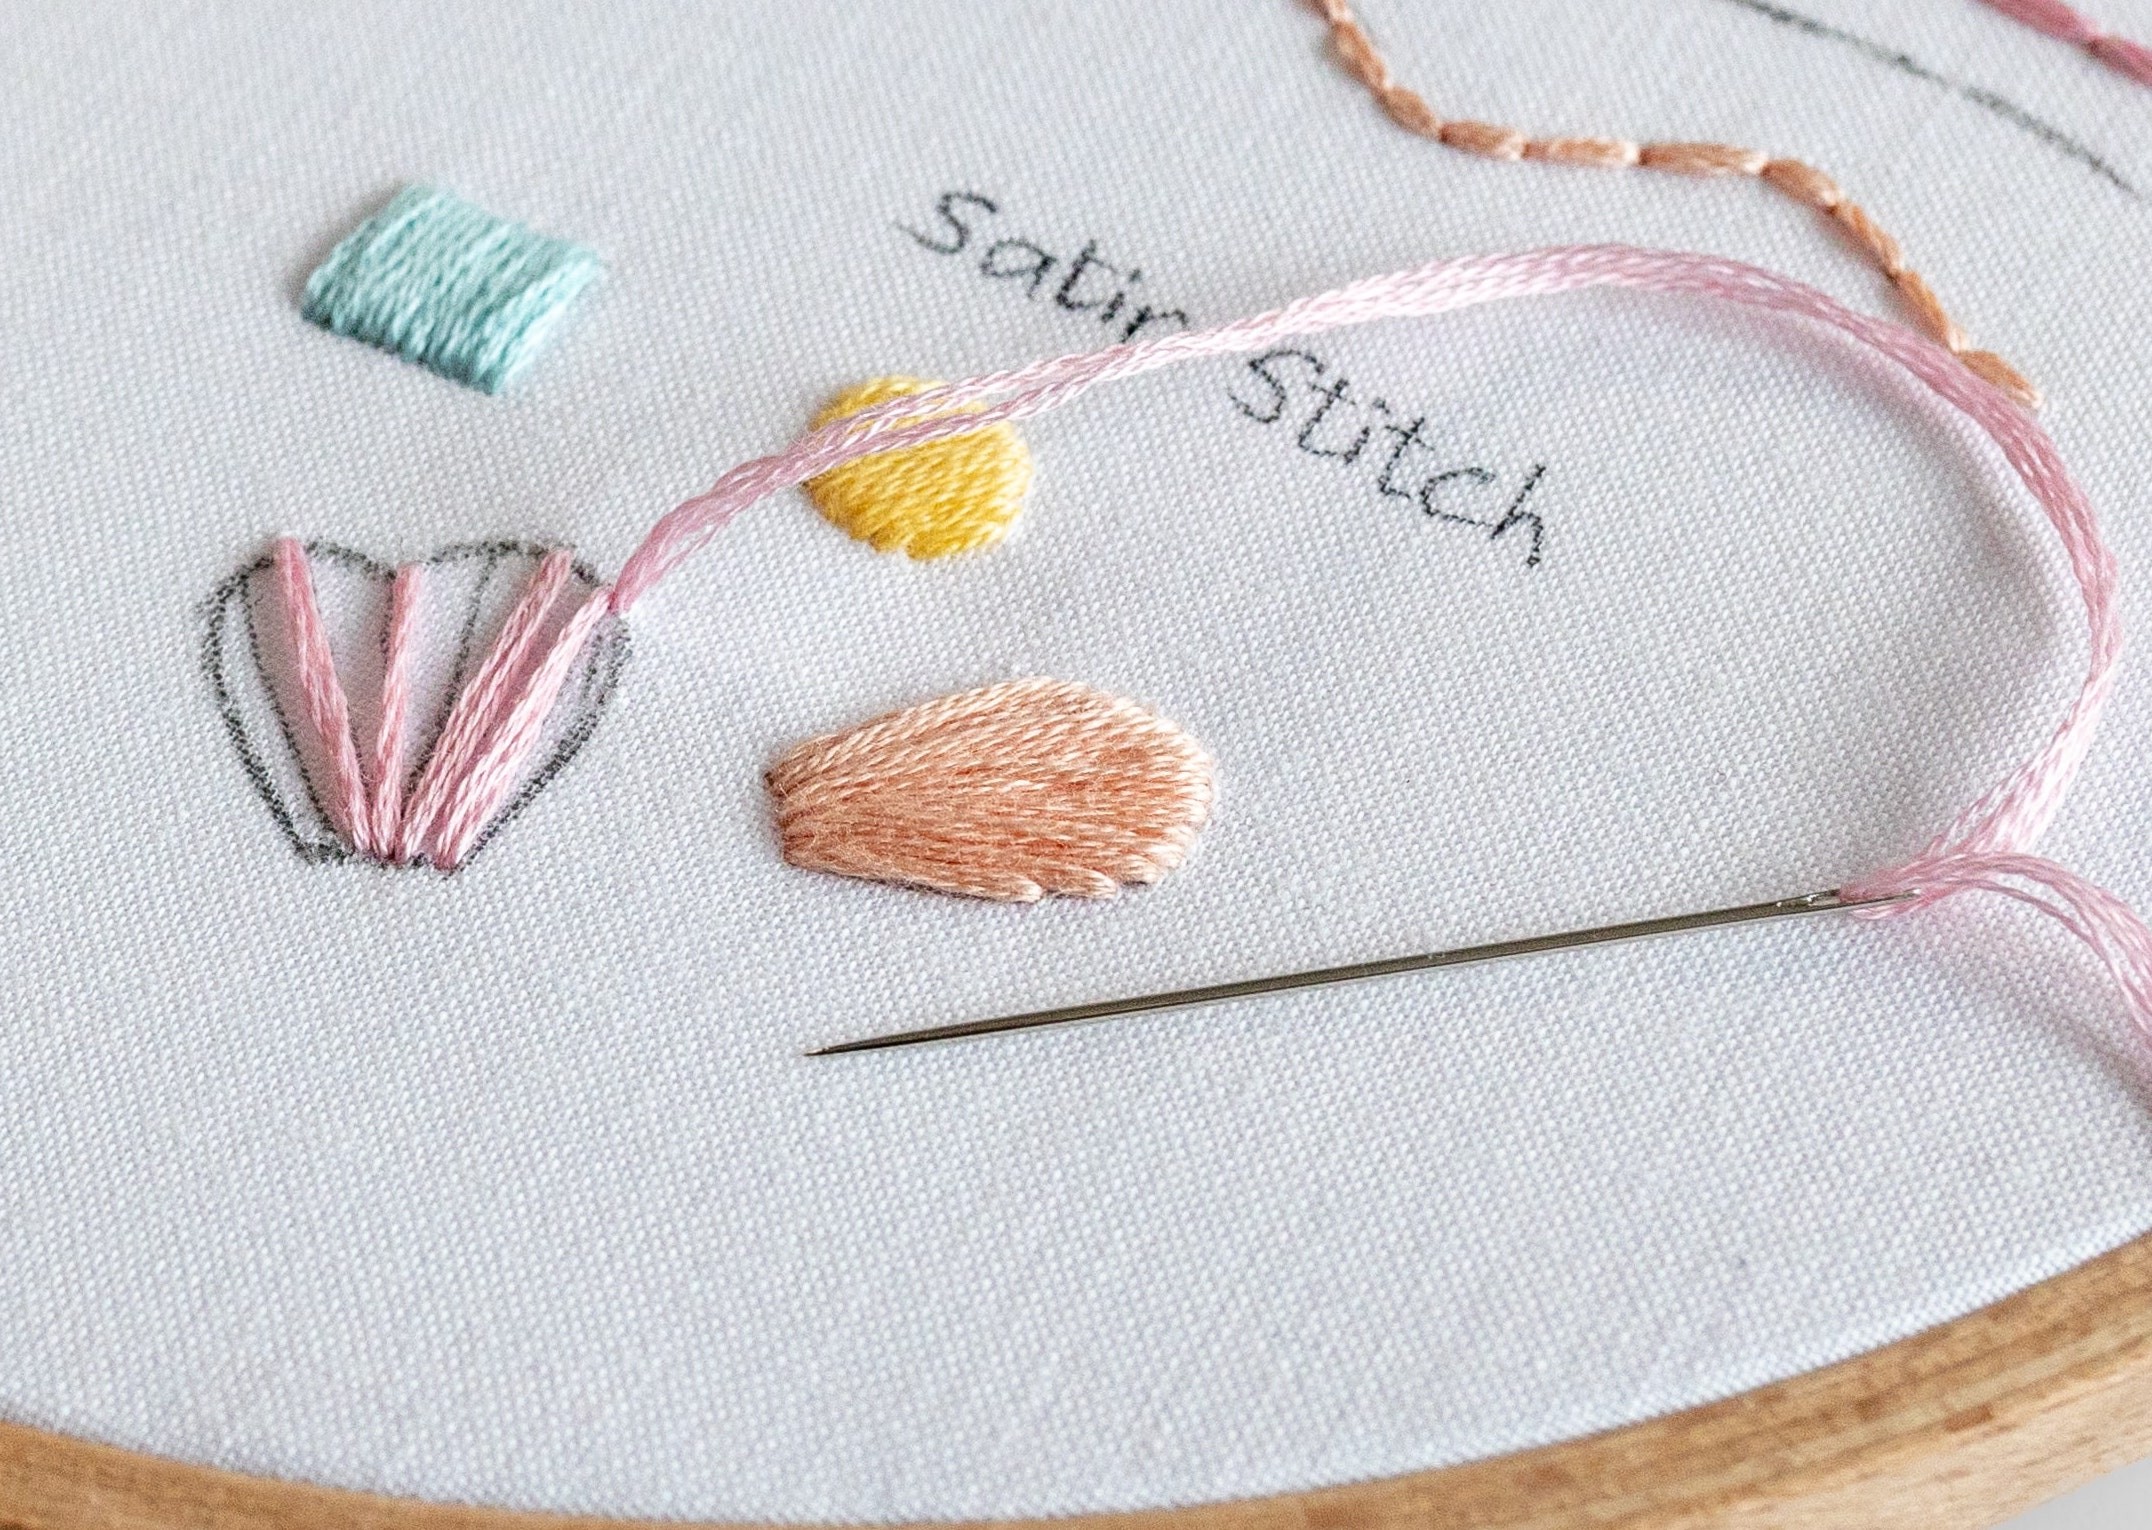 This image shows Satin Stitch shapes in an embroidery sampler.